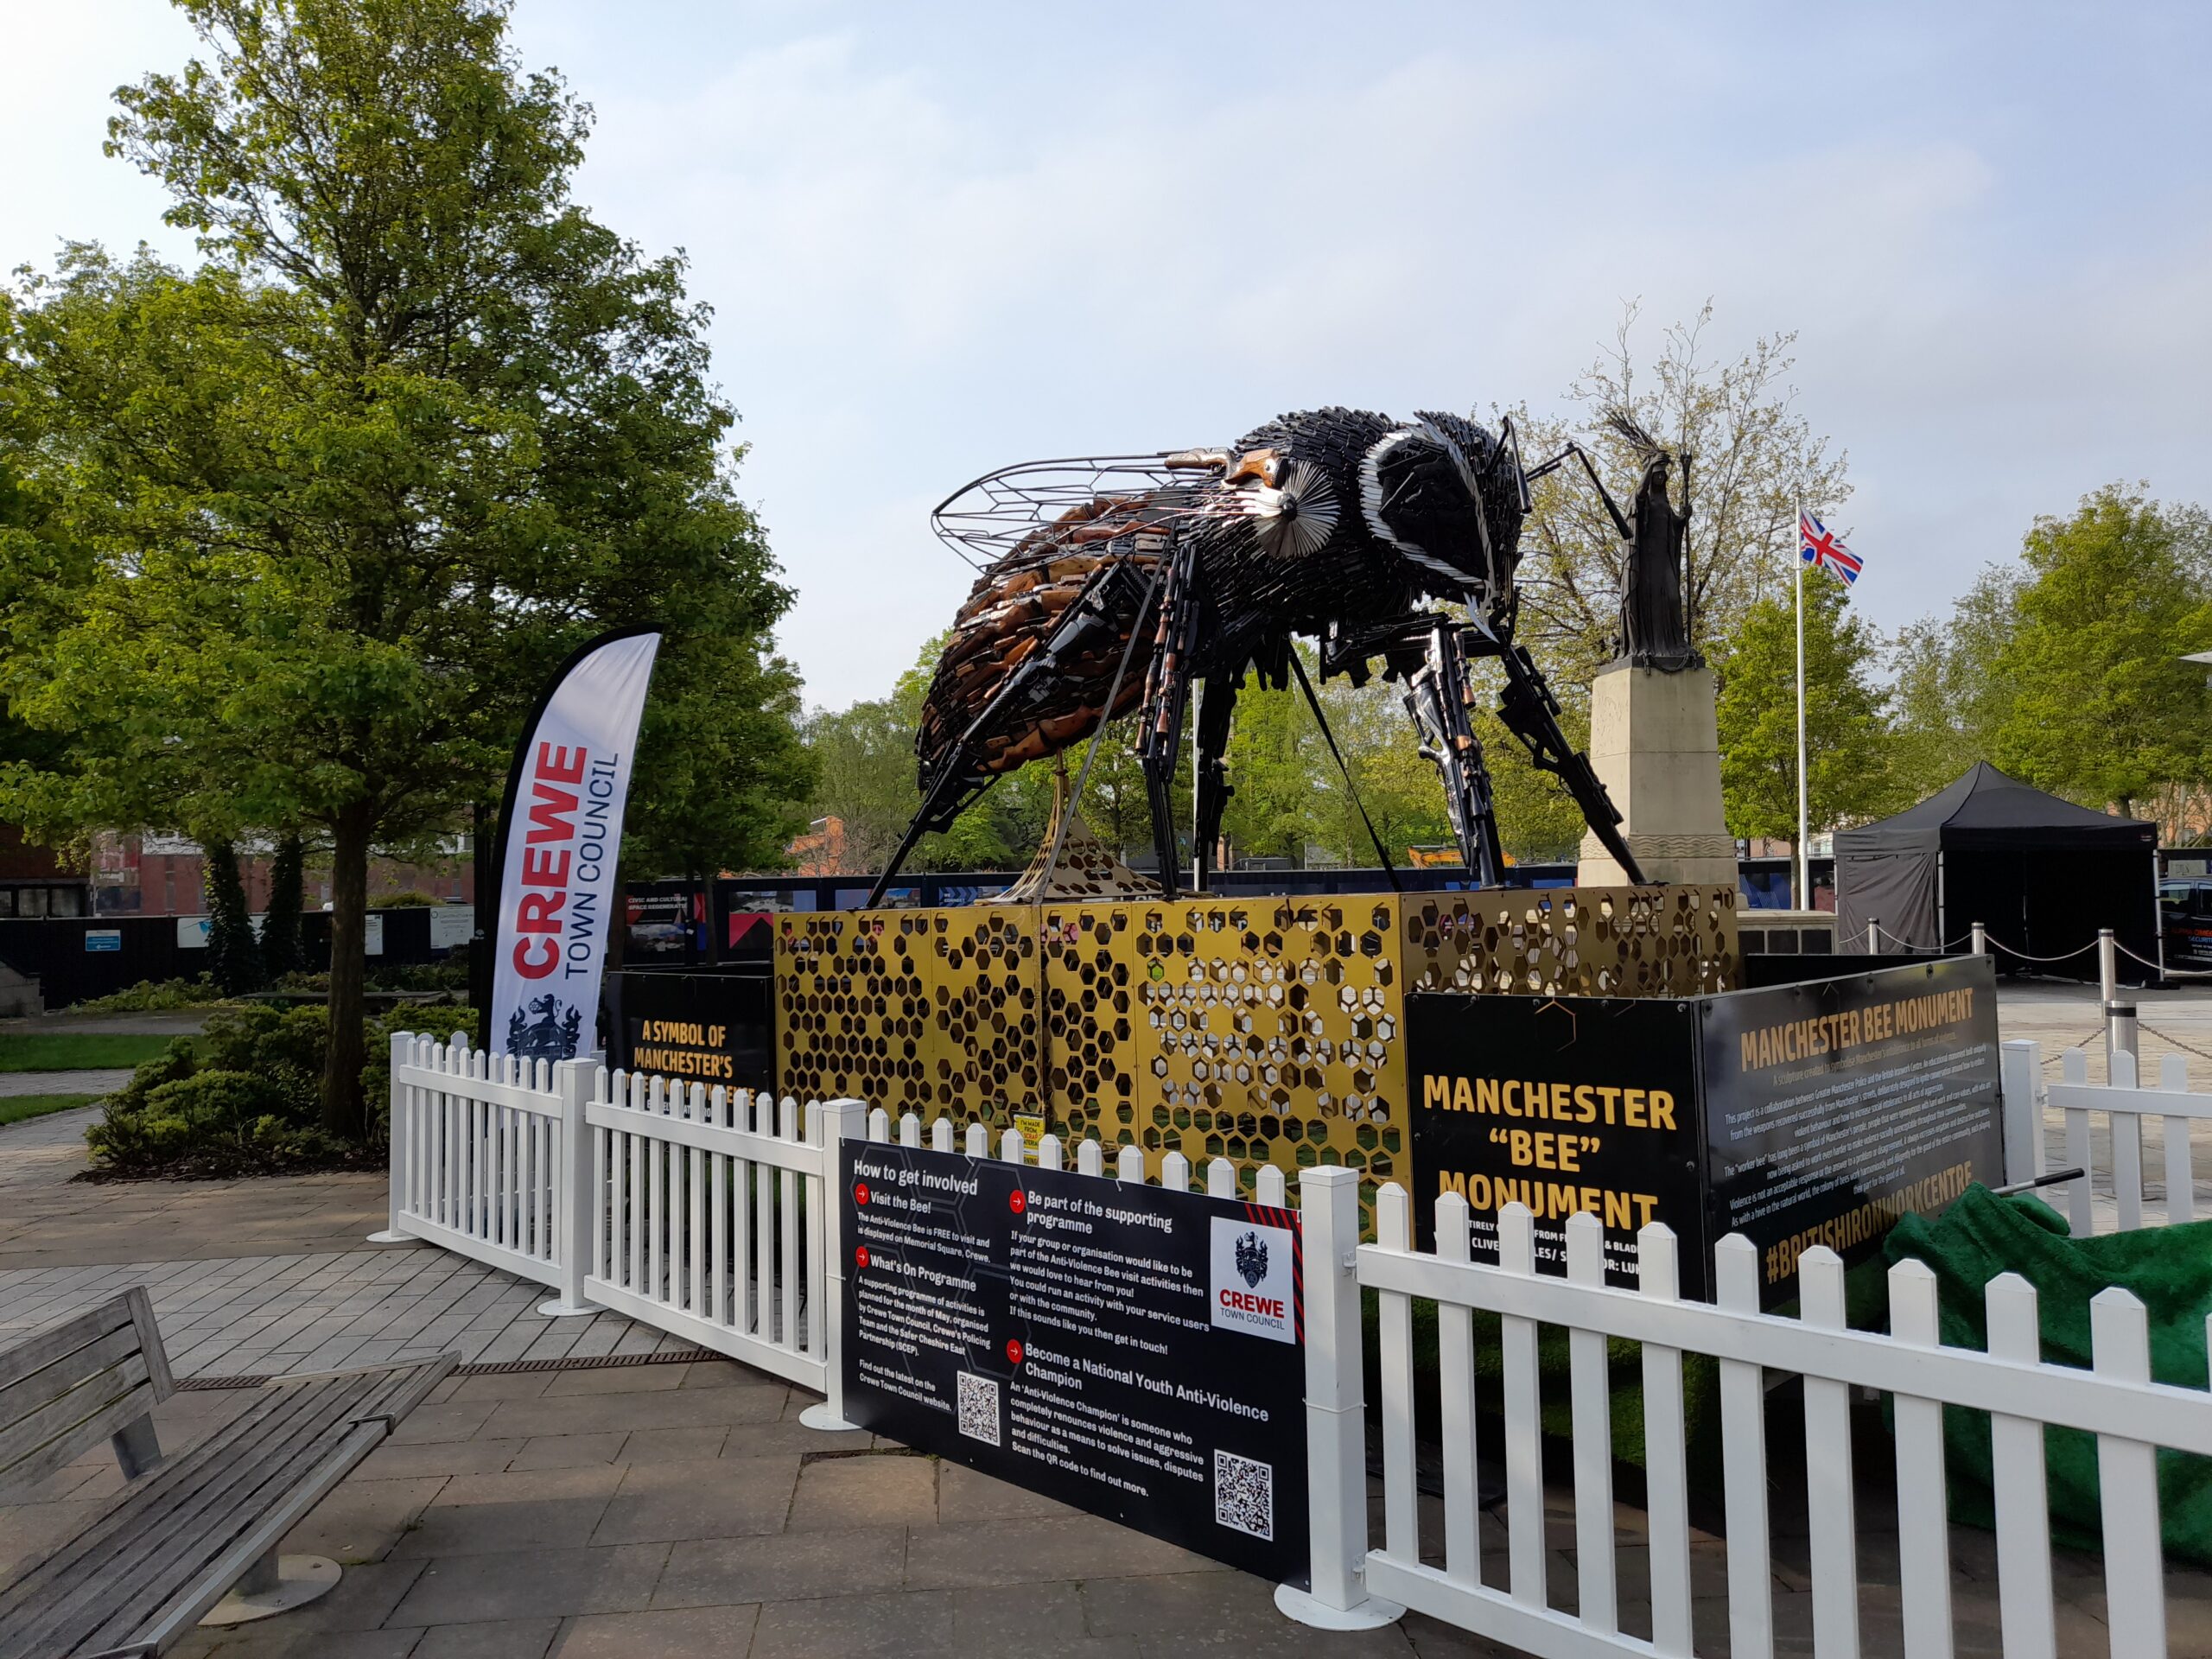 Anti-Violence Bee arrives in Crewe for month-long visit